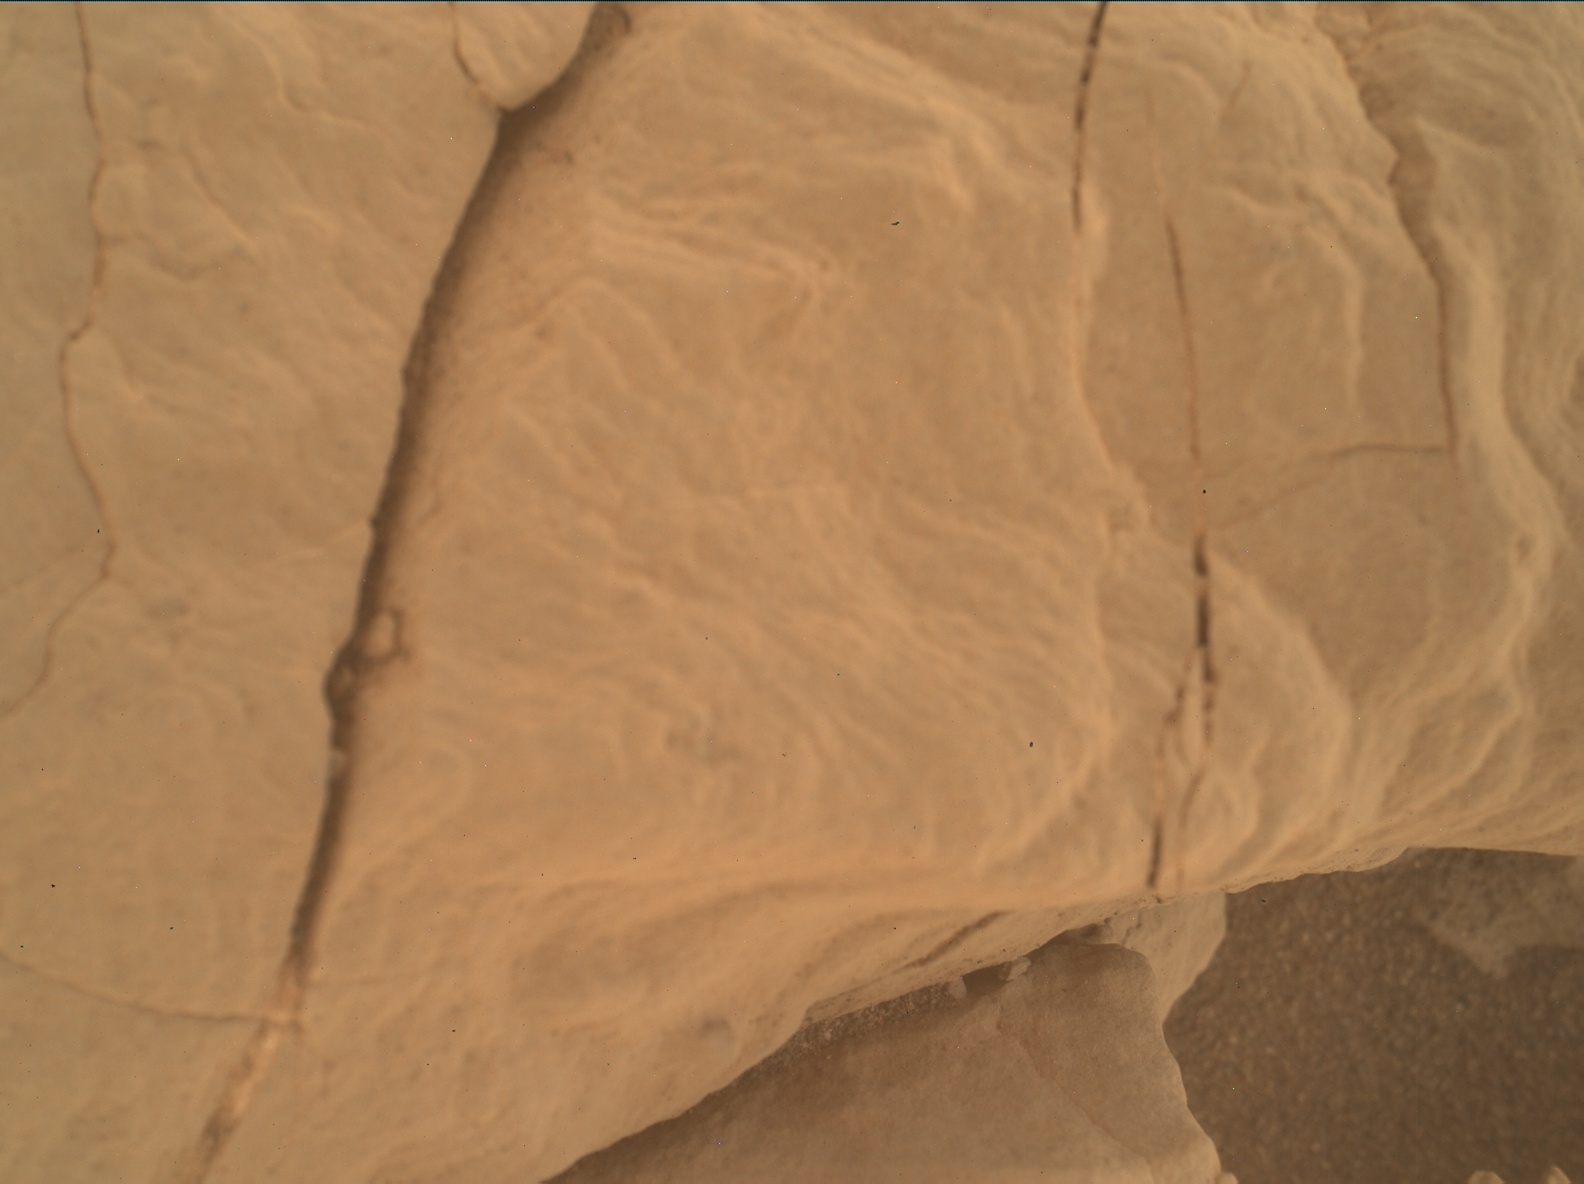 Nasa's Mars rover Curiosity acquired this image using its Mars Hand Lens Imager (MAHLI) on Sol 2645